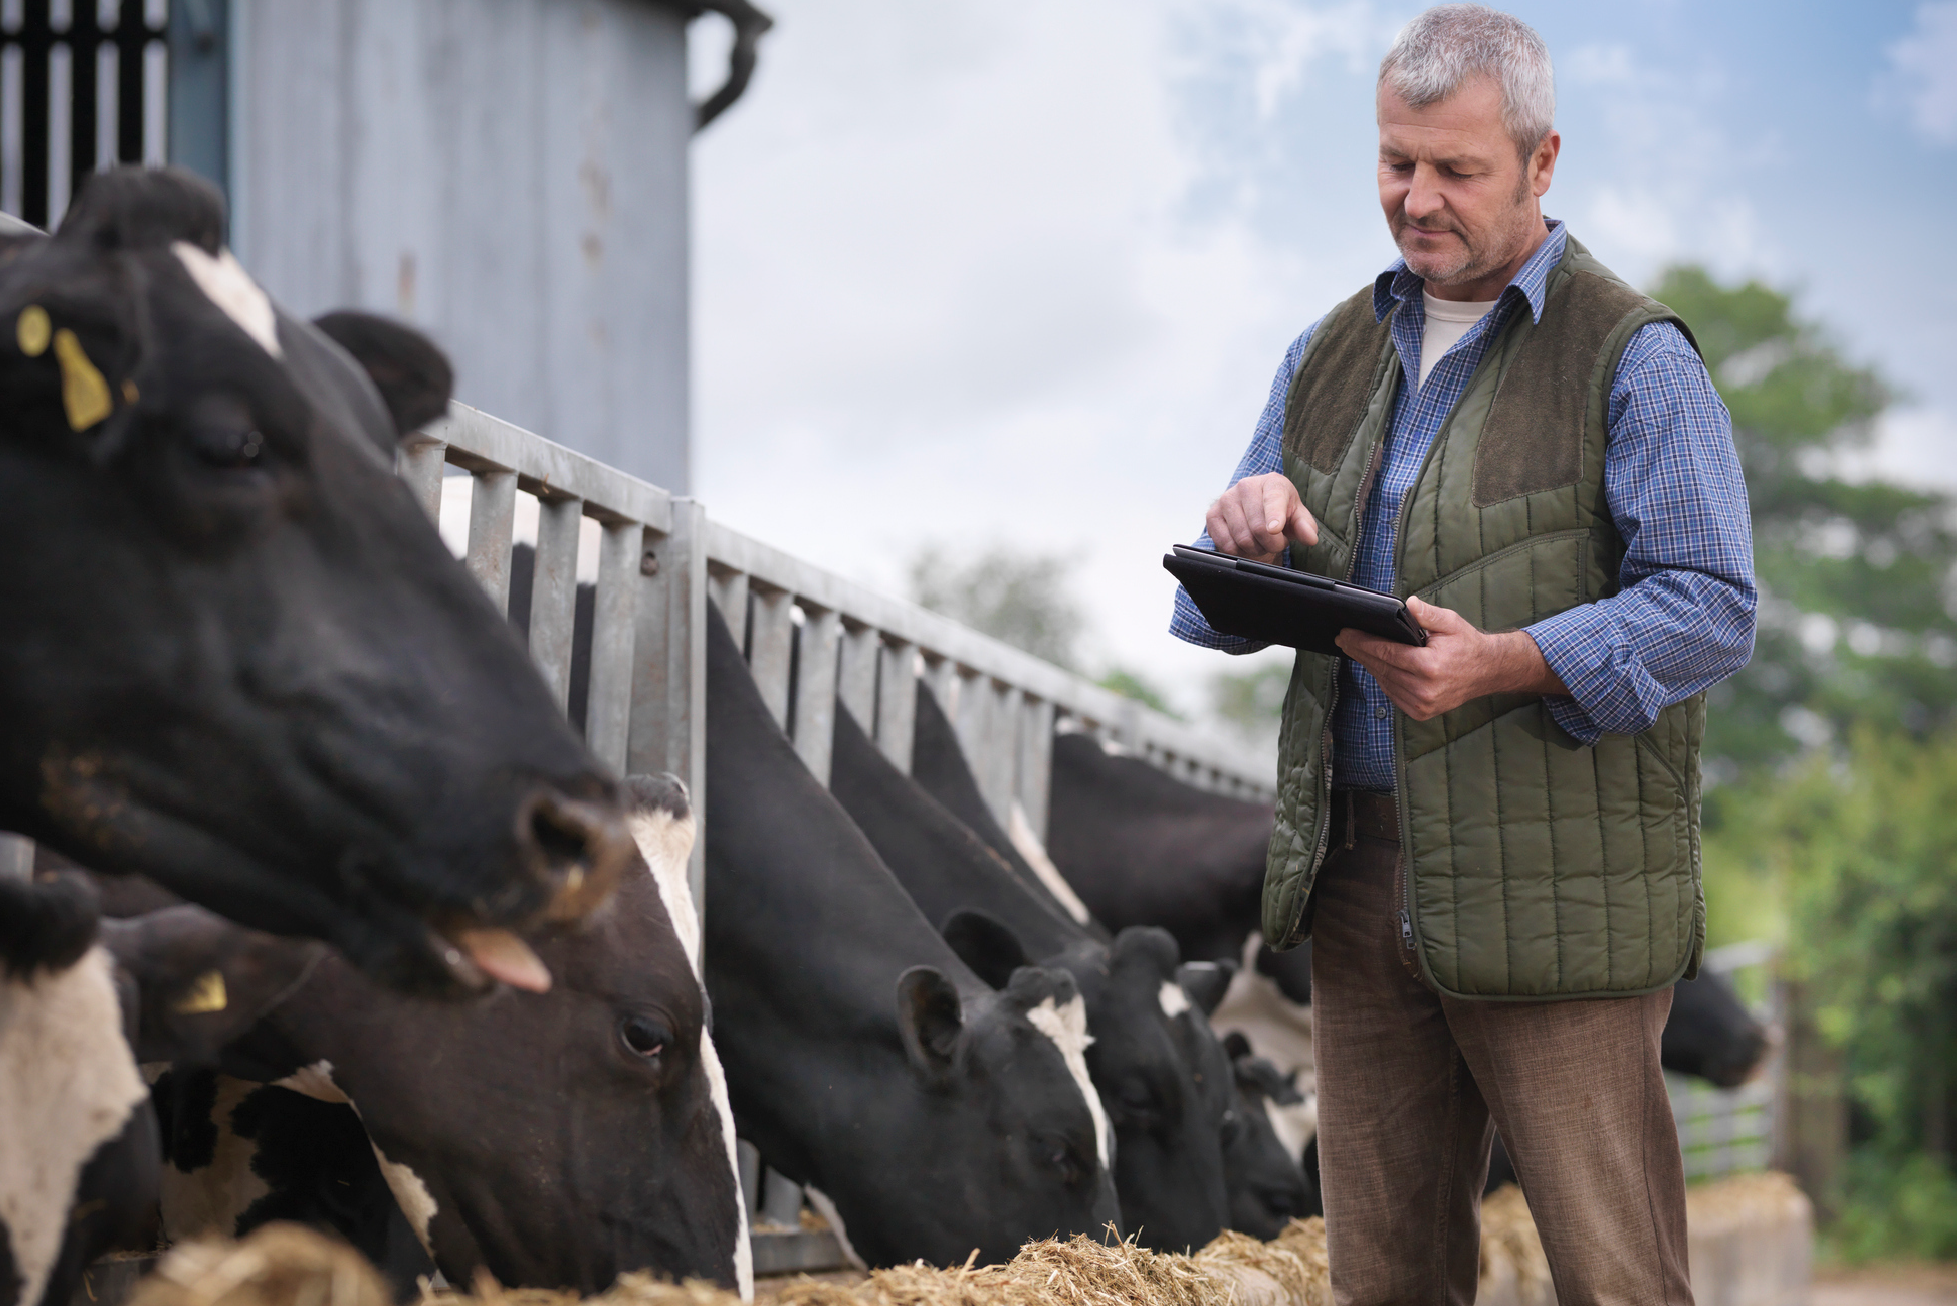 Tailored for the Dairy industry : Eka source to pay for direct materials